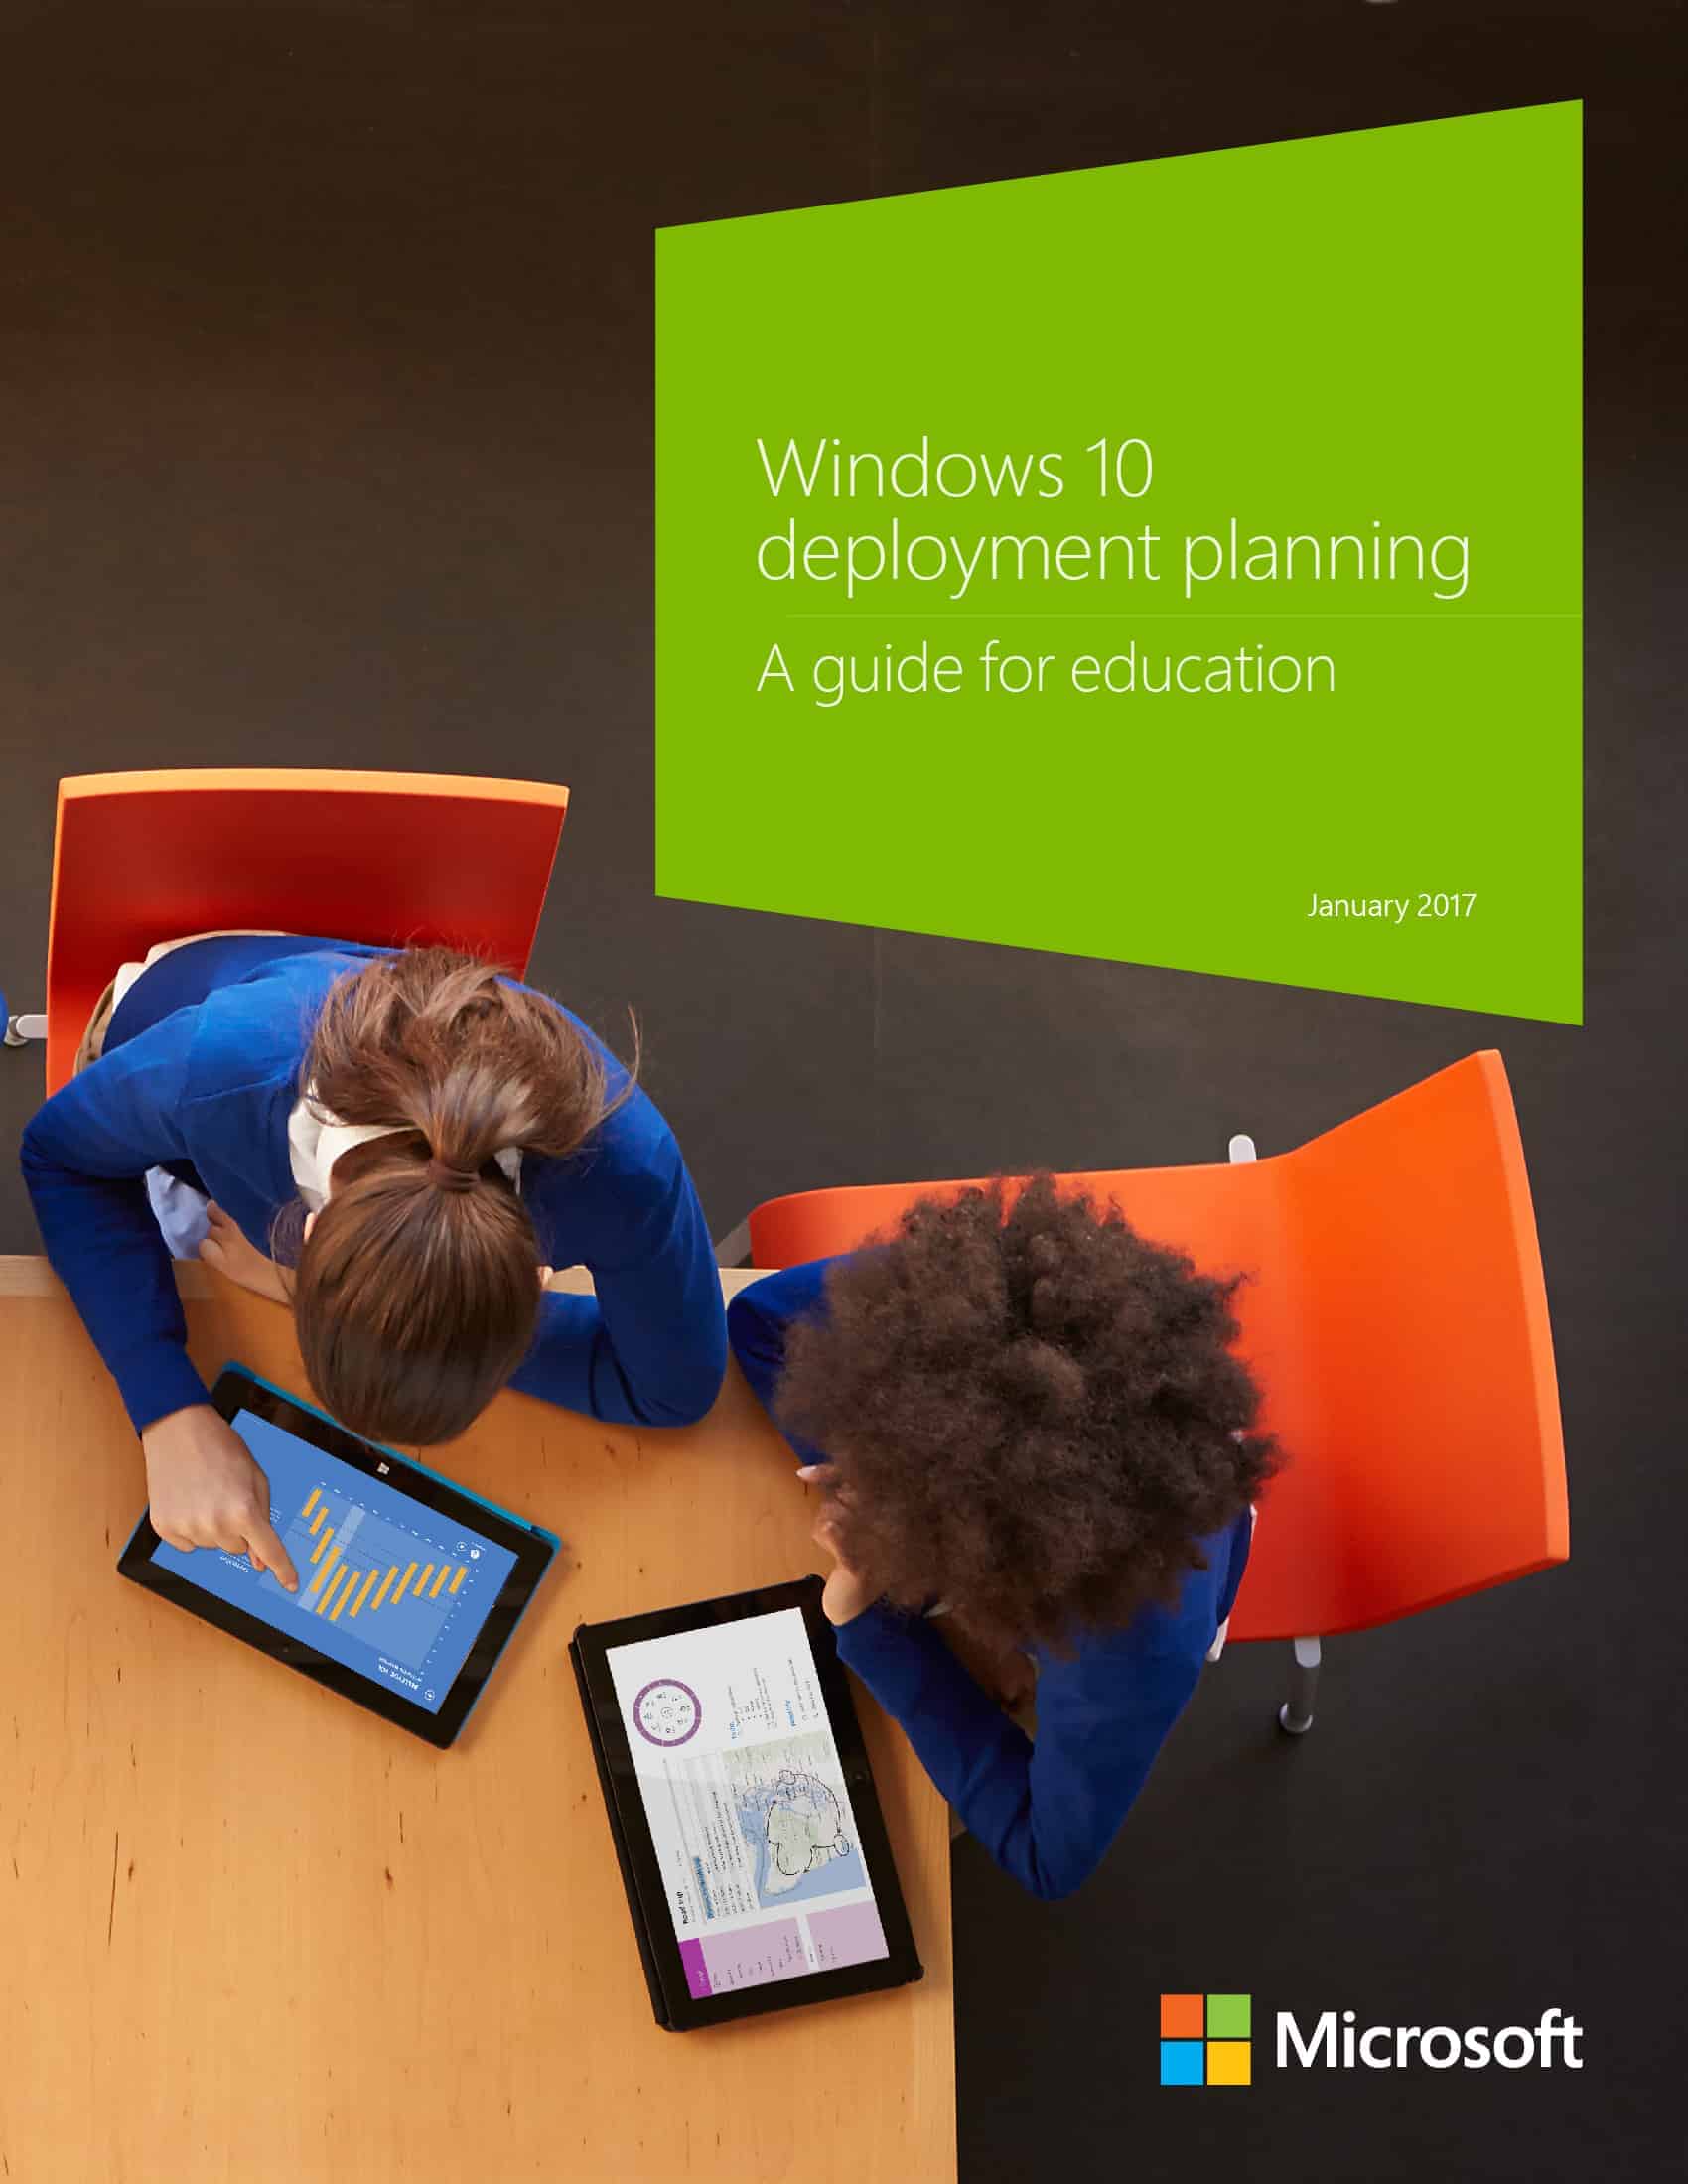 Windows 10 deployment planning guide for education